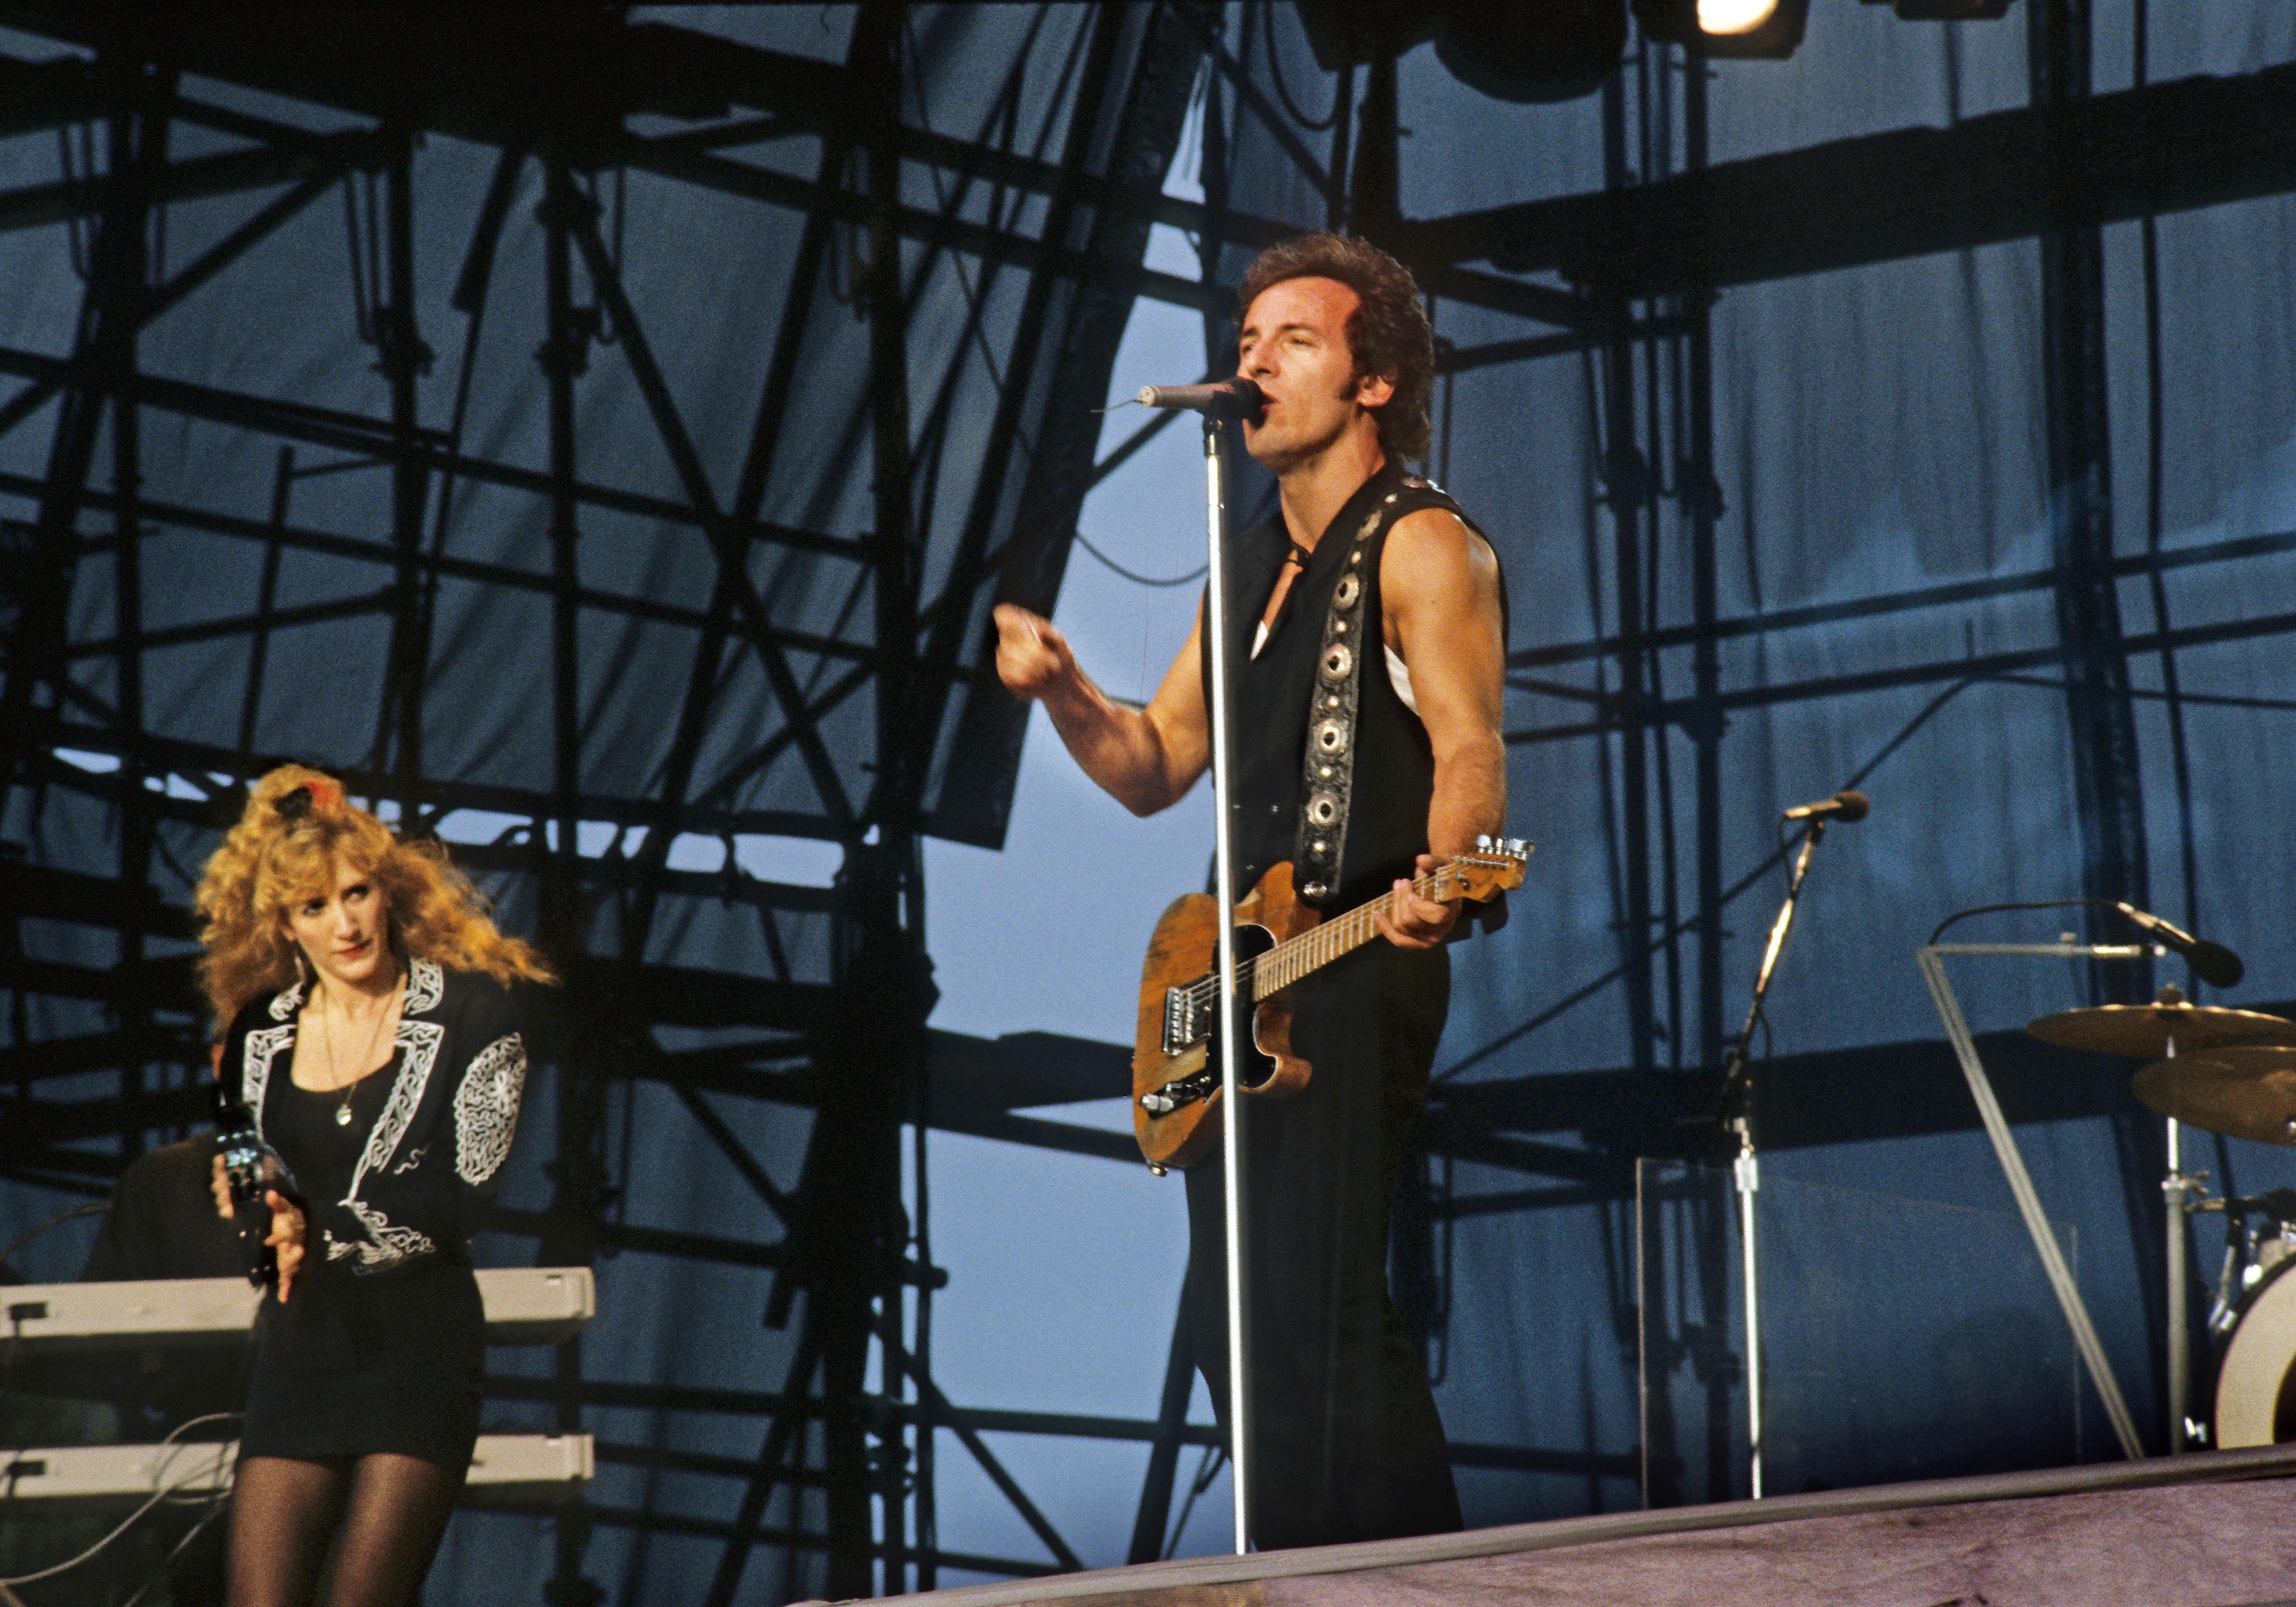 Bruce Springsteen performs live on stage with his wife Patti Scialfa at Berliner Rocksommer in Radstadion Weissensee, Ostberlin, on July 19, 1988. | Source: Getty Images